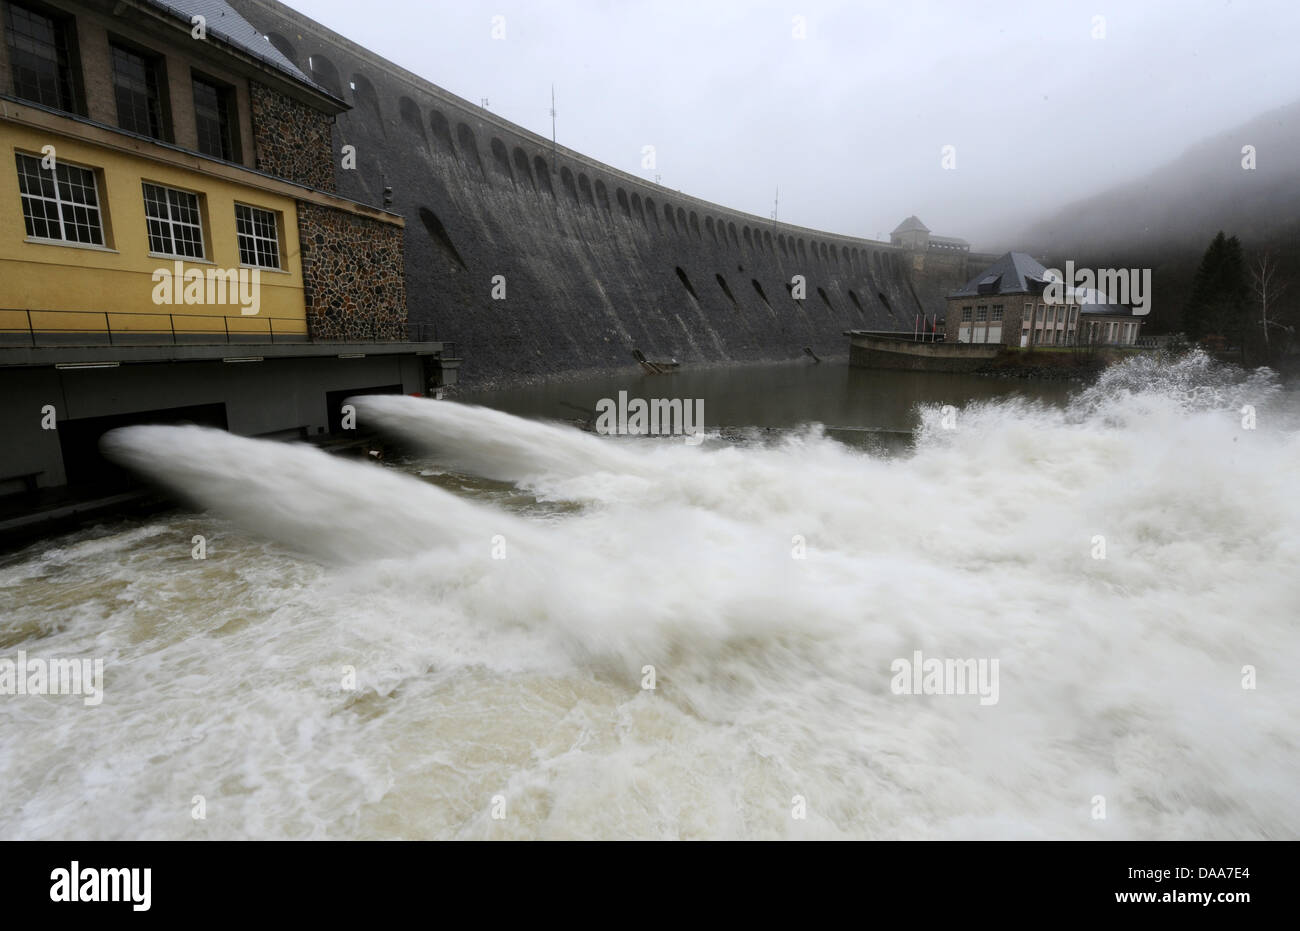 Water streams out of two scour outlets at the Edertal dam in Edertal-Hemfurth, Germany, 13 January 2011. The largest reservoir of Hesse is in danger of overrunning, due to heavy rainfall and thaw. Momentarily, water is let out of the reservior via scour outlets to create further storage space. Photo: Uwe Zucchi Stock Photo